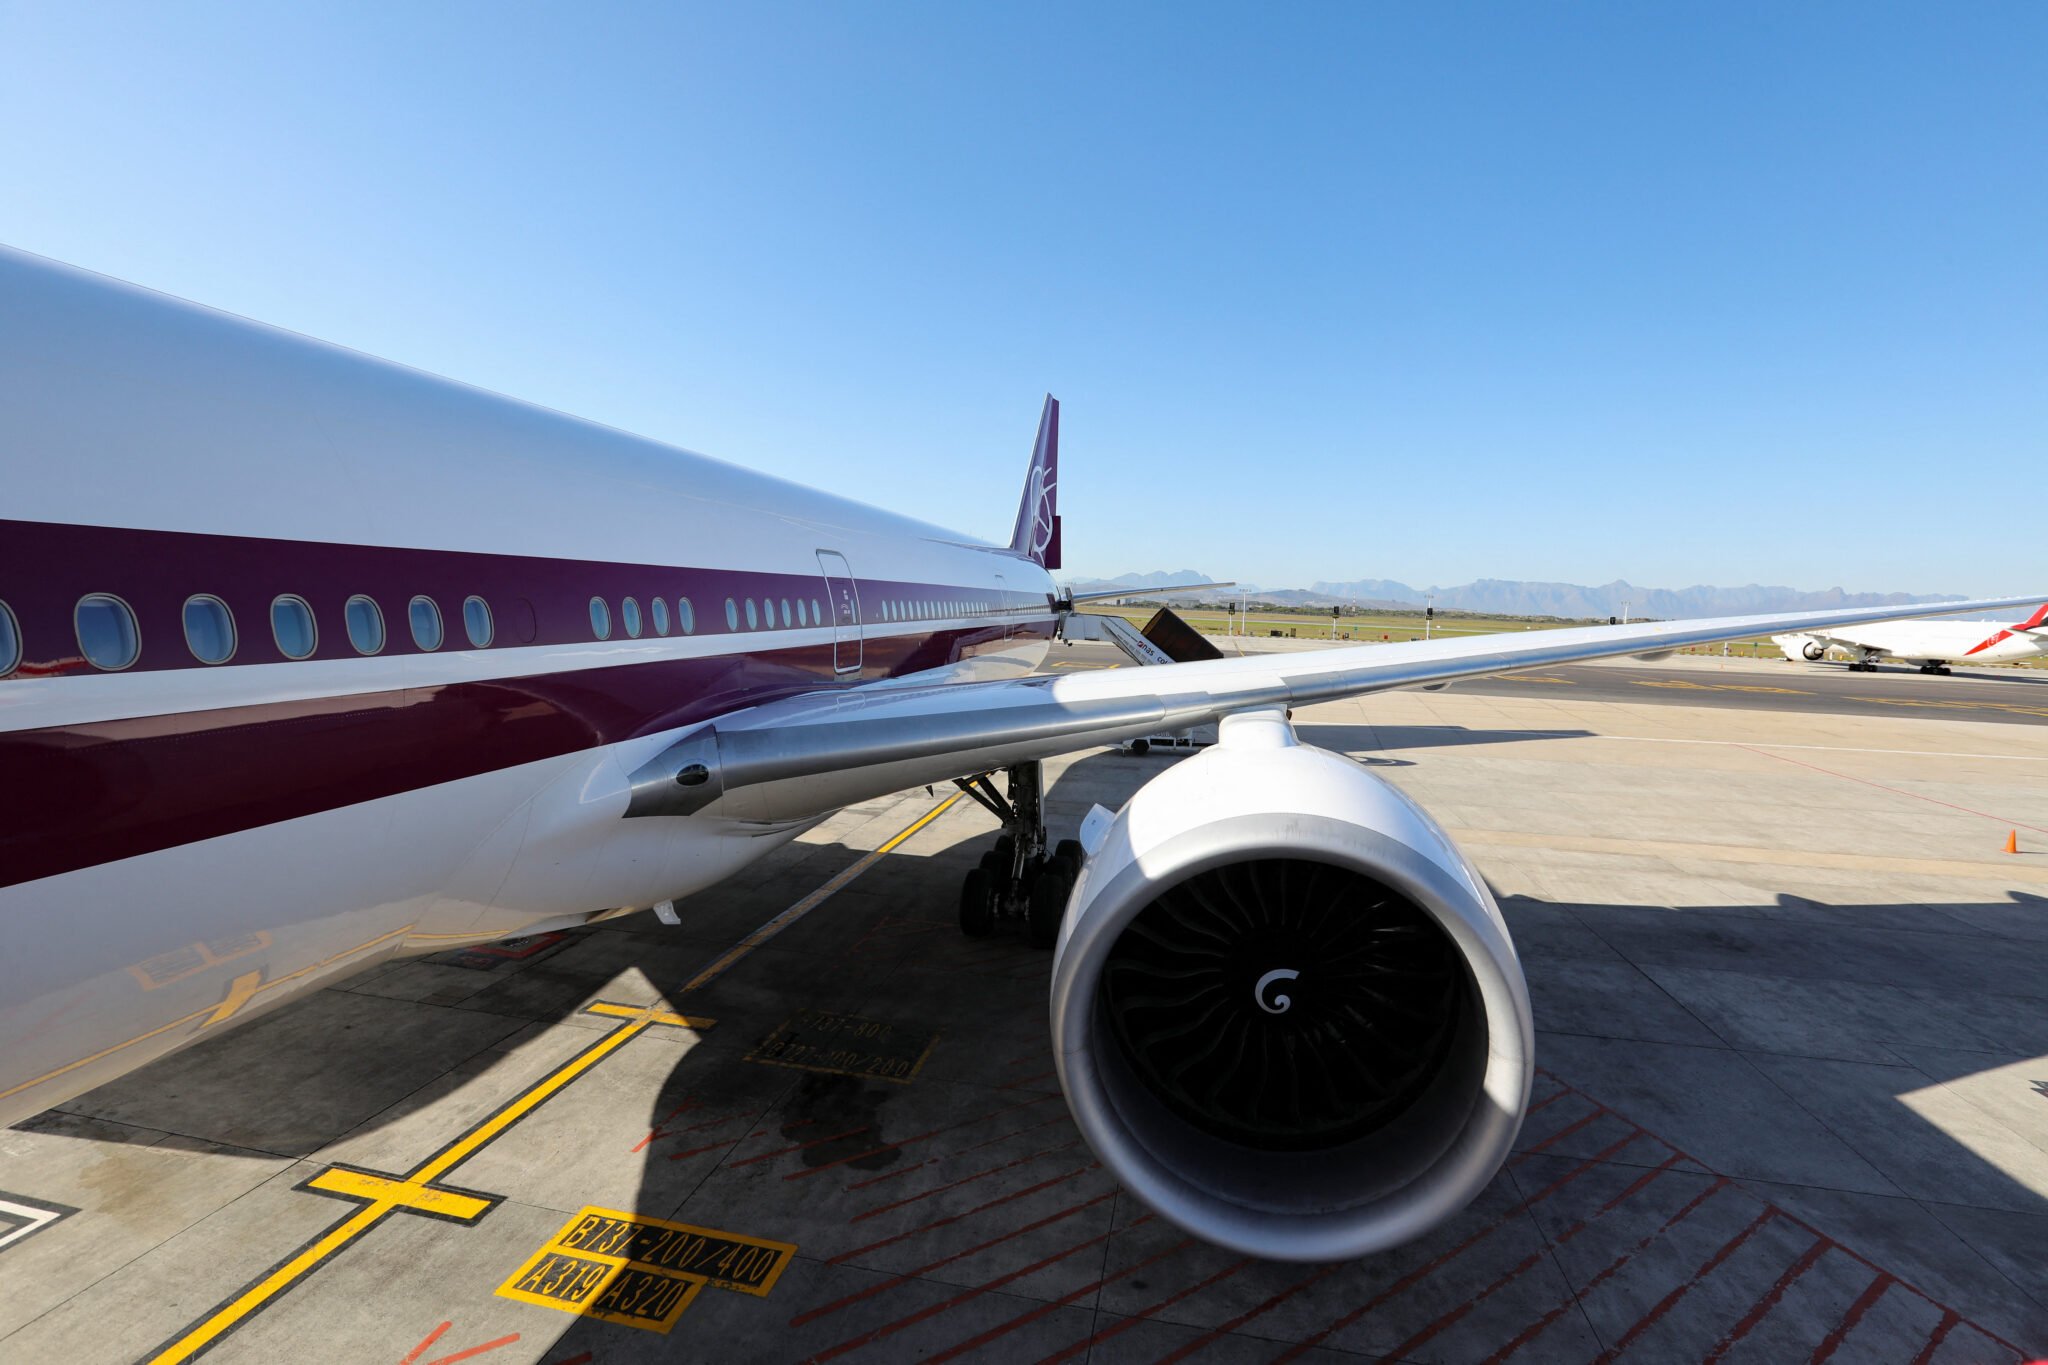 Qatar Airways to invest in an airline in southern Africa, CEO says